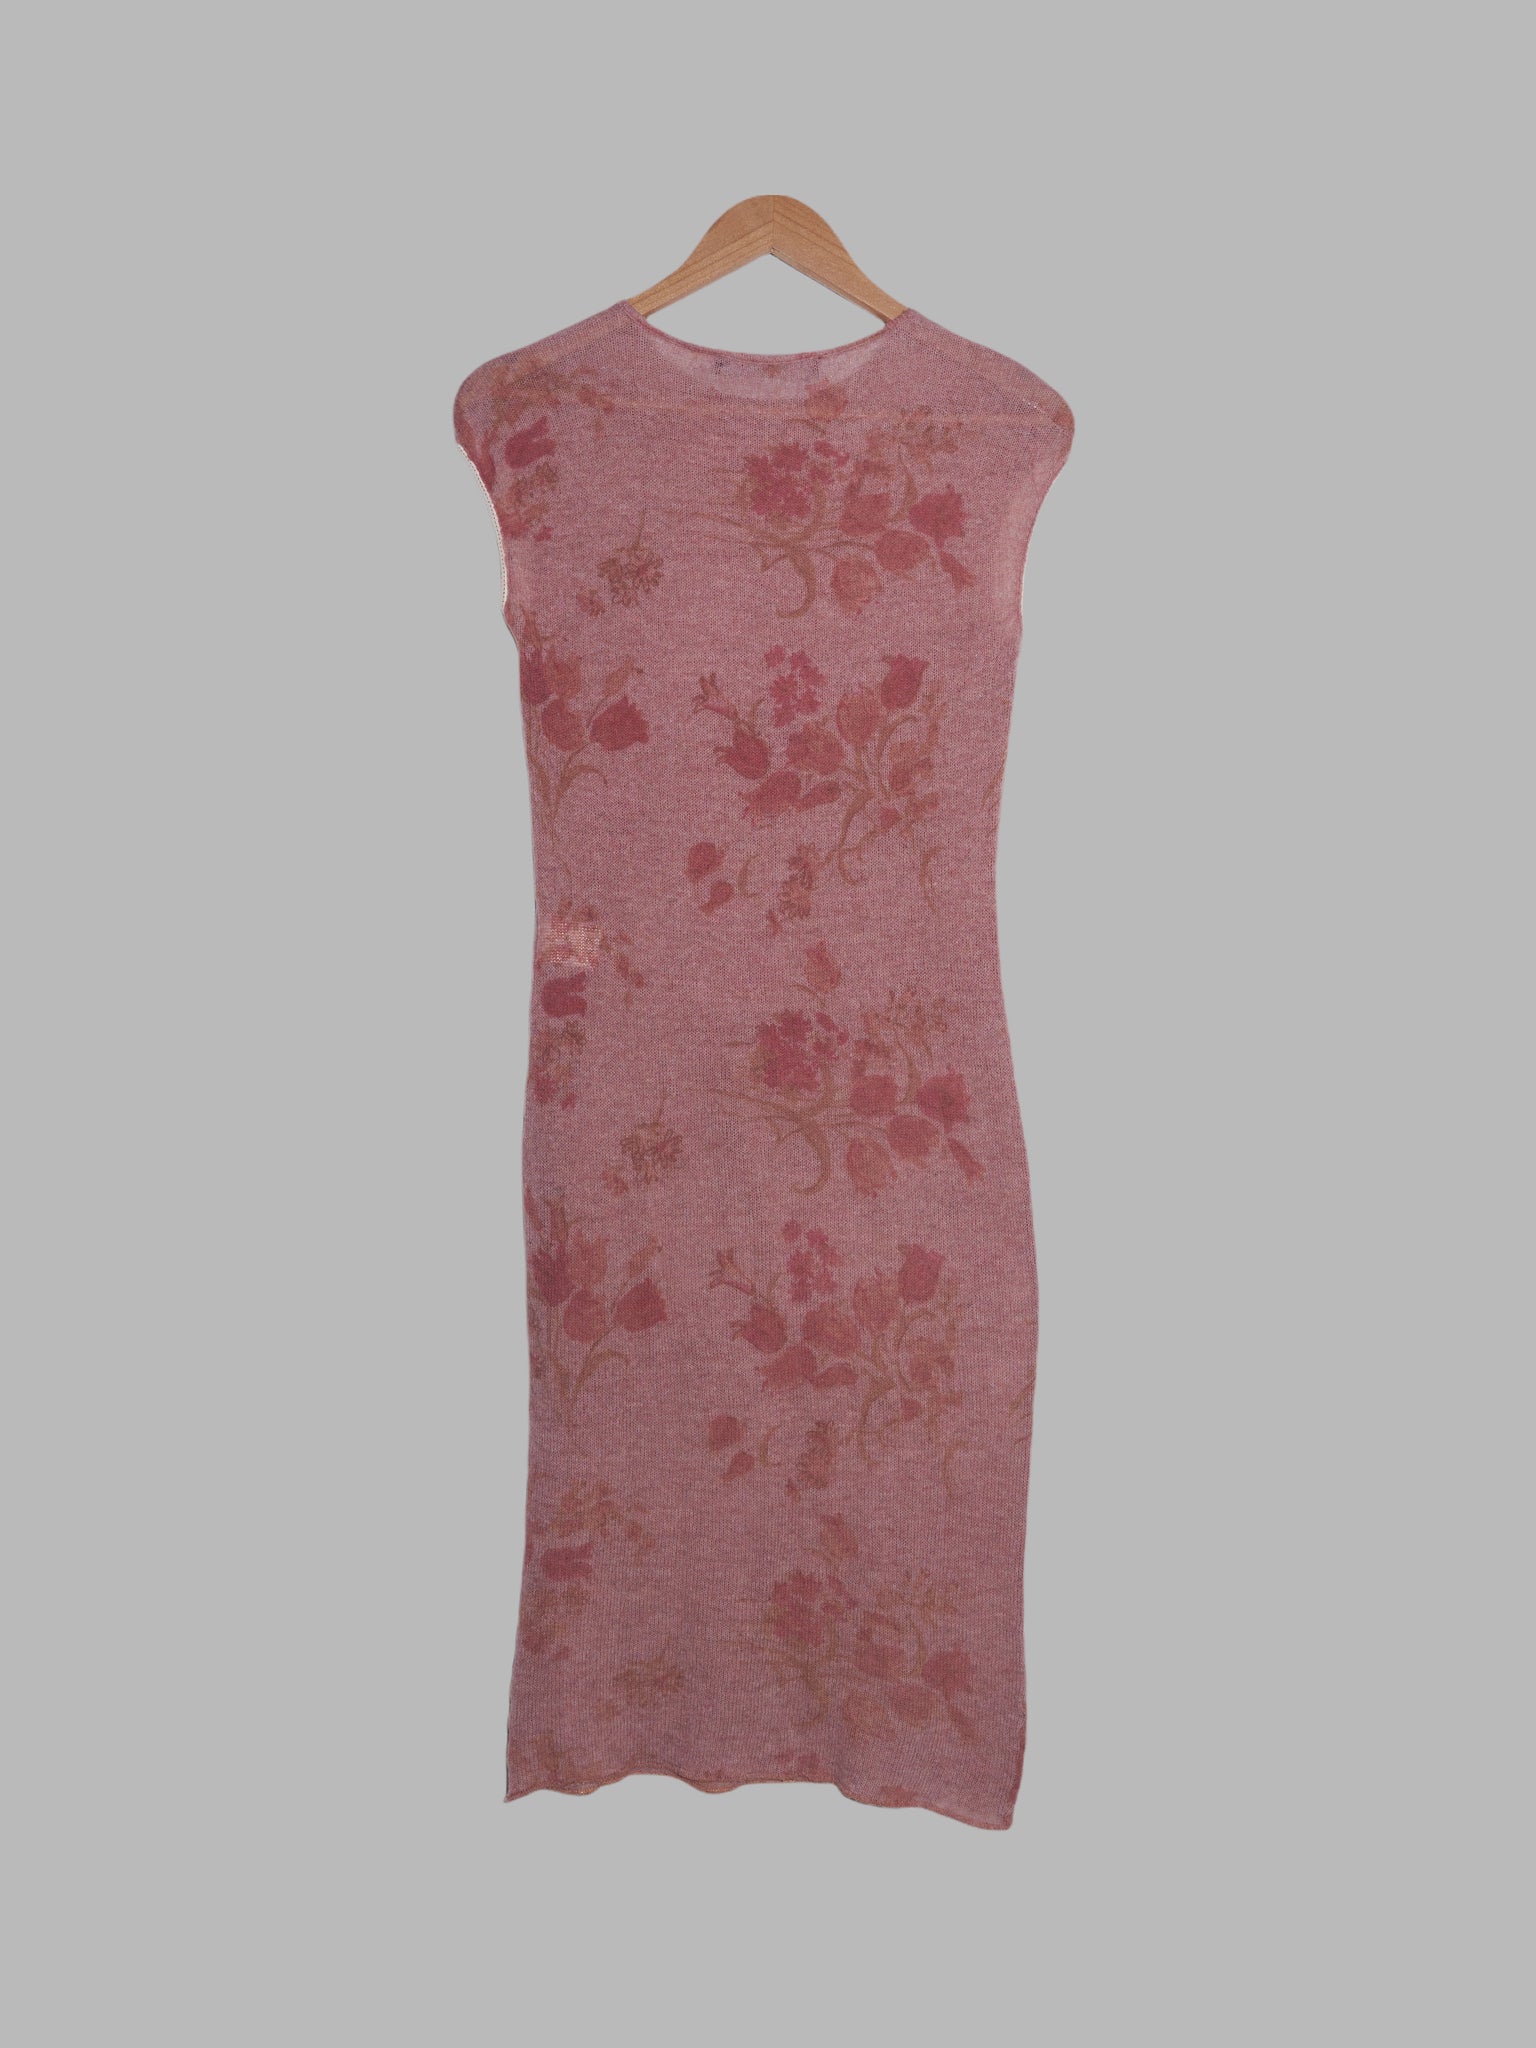 Jean Colonna pink floral print wool sleeveless dress with white lace armhole